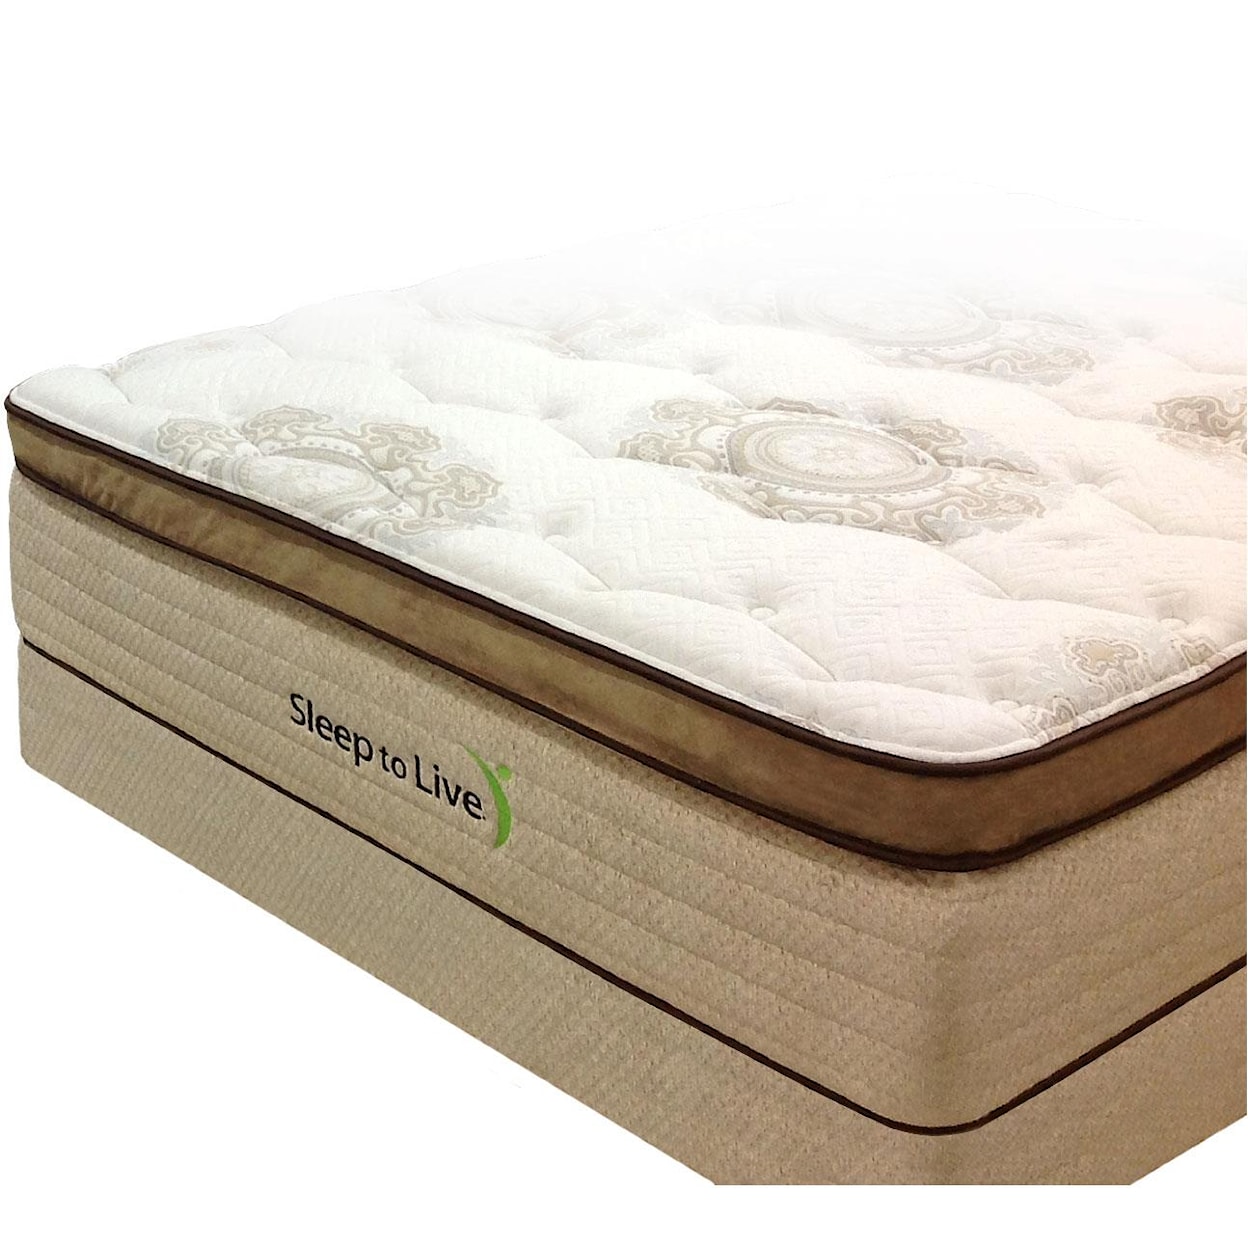 Kingsdown Body System 2 Twin XL Pocketed Coil Mattress